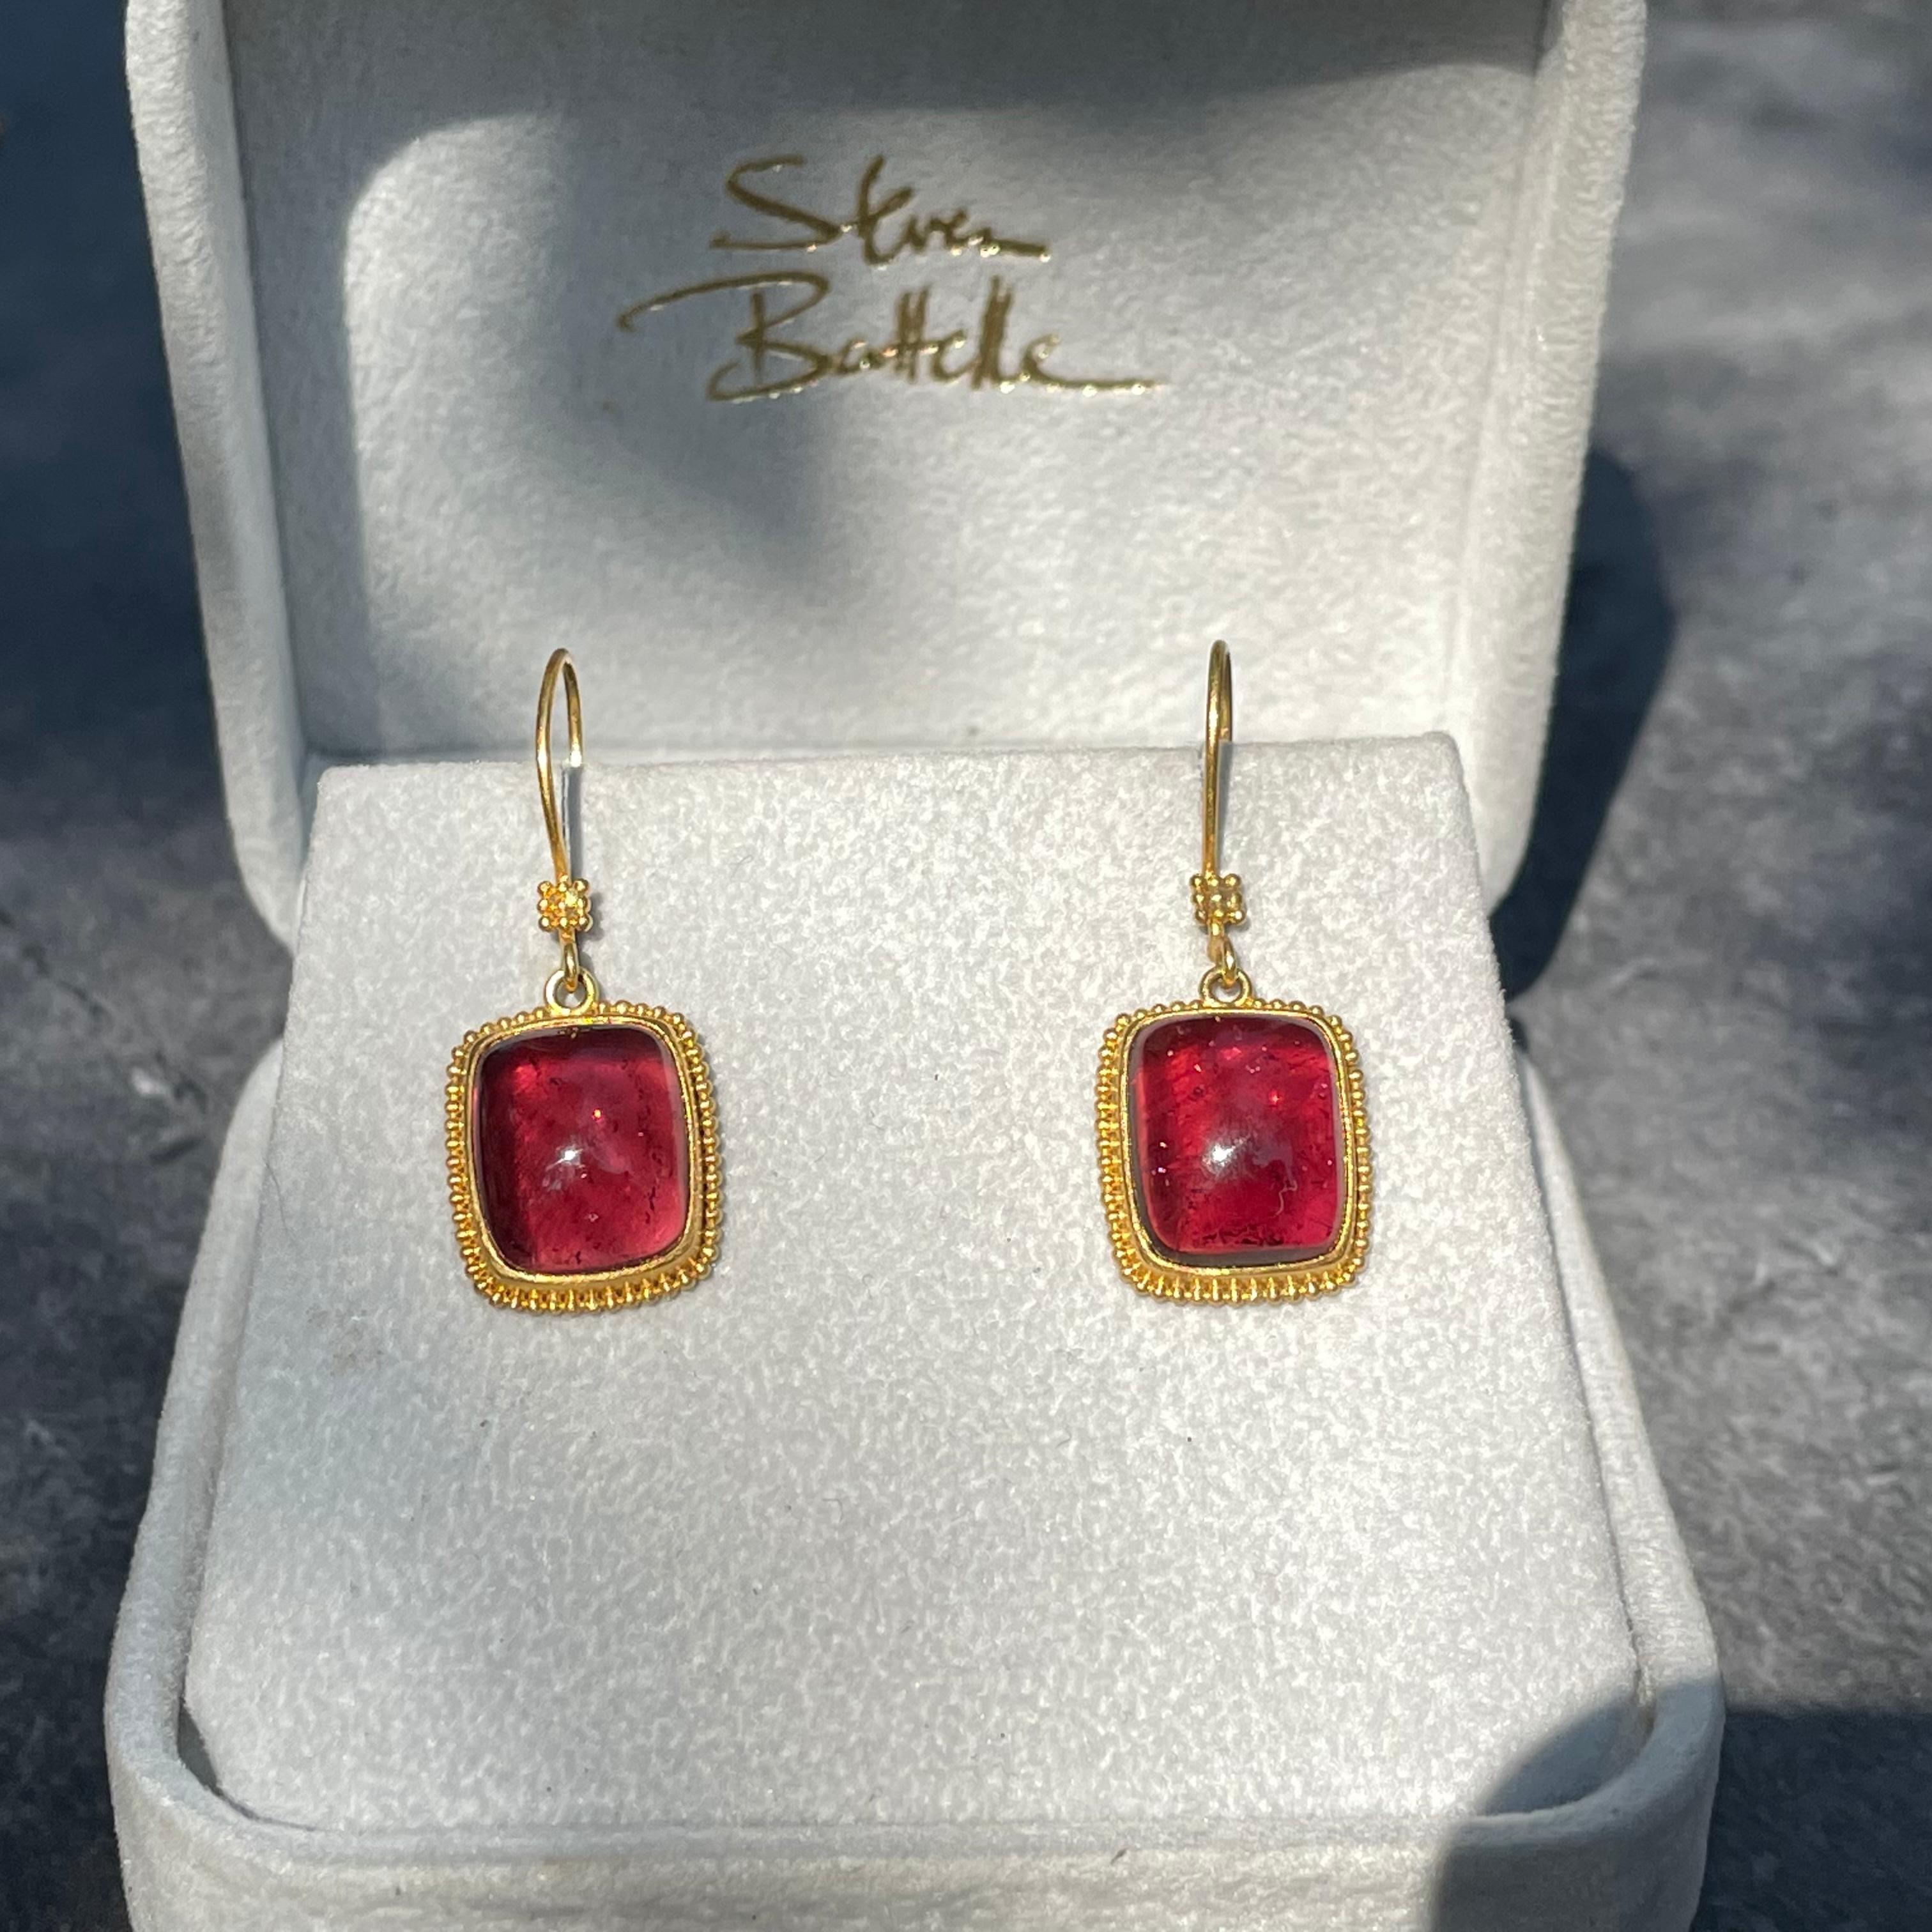 Steven Battelle 12.4 Carats Pink Tourmaline Cabochon 22K Gold Drop Earrings In New Condition For Sale In Soquel, CA